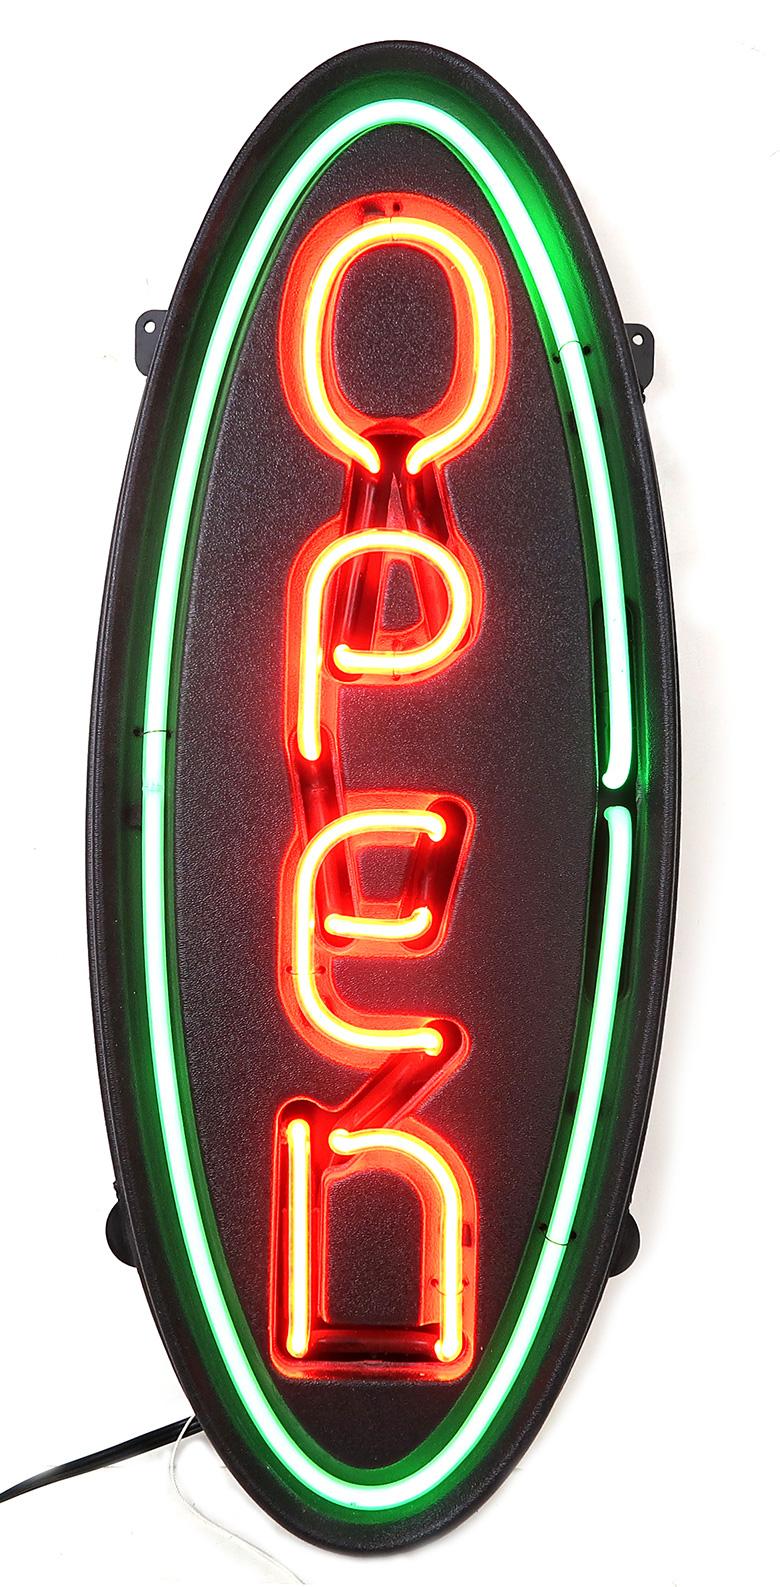 Neon Open Sign, Electric orange/green neon by Fallon, Exc working cond, 28"